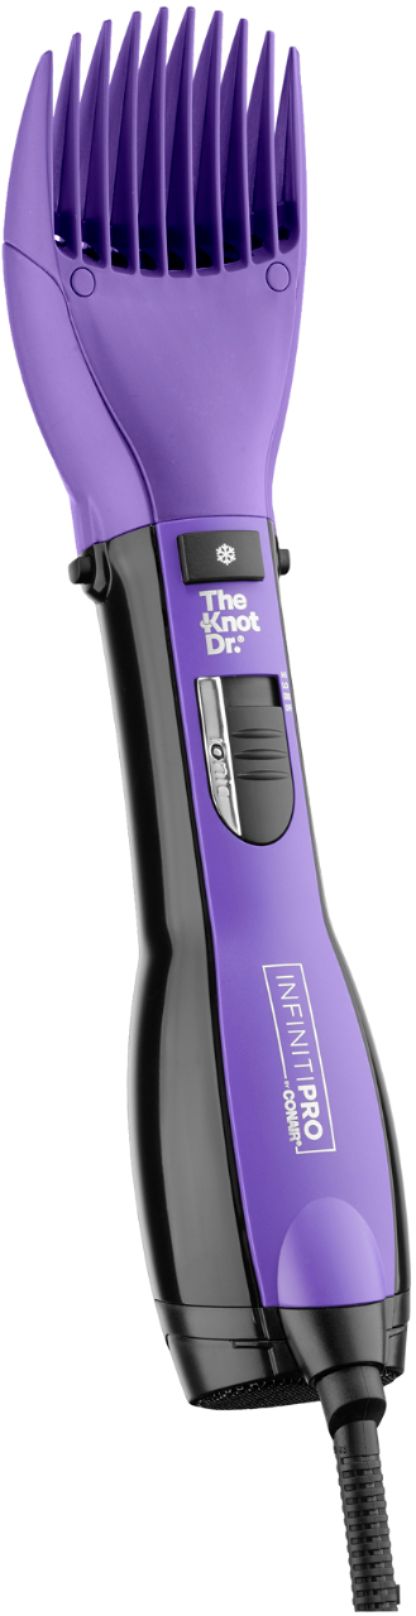 Conair - All-in-One Dryer Brush - Purple And Black_11